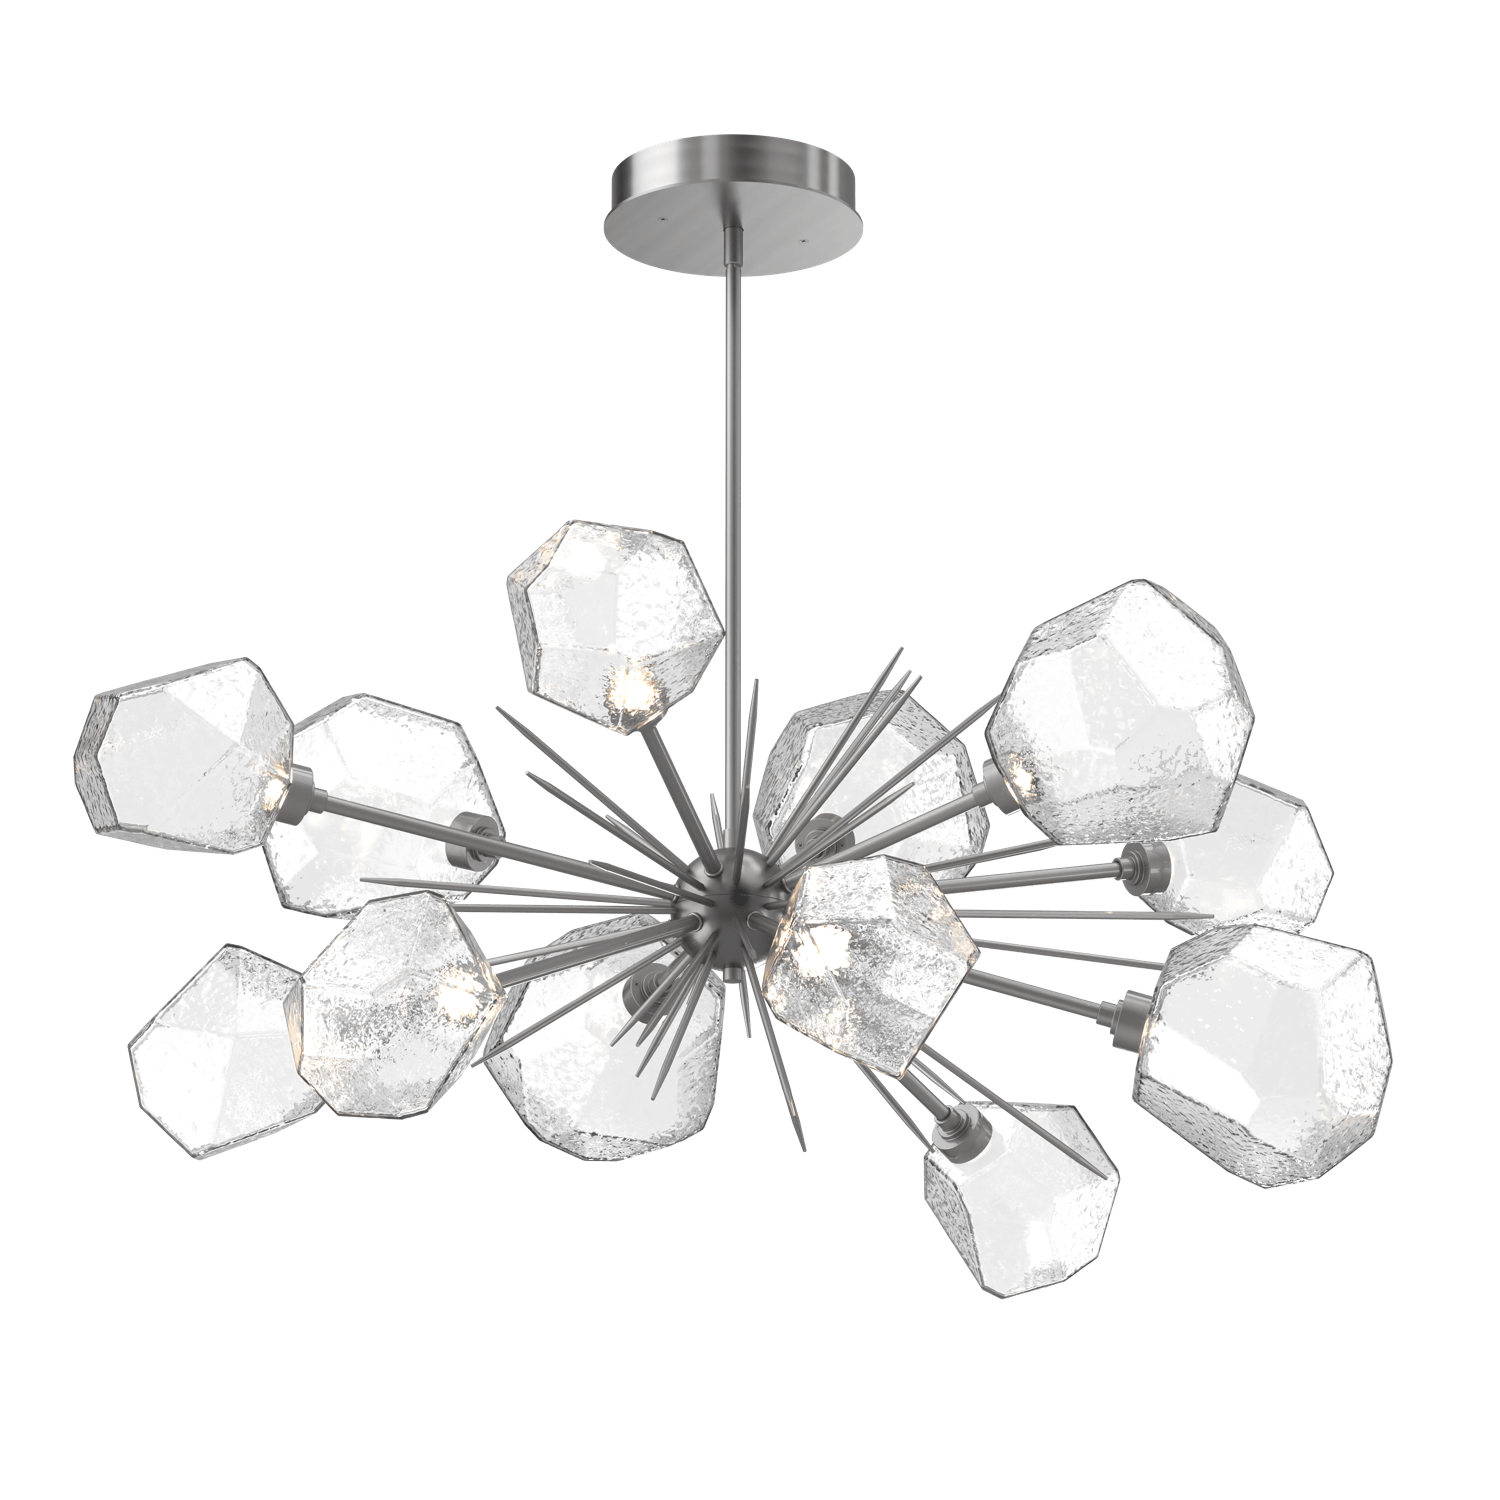 PLB0039-0D-SN-C-Hammerton-Studio-Gem-43-inch-oval-starburst-chandelier-with-satin-nickel-finish-and-clear-blown-glass-shades-and-LED-lamping